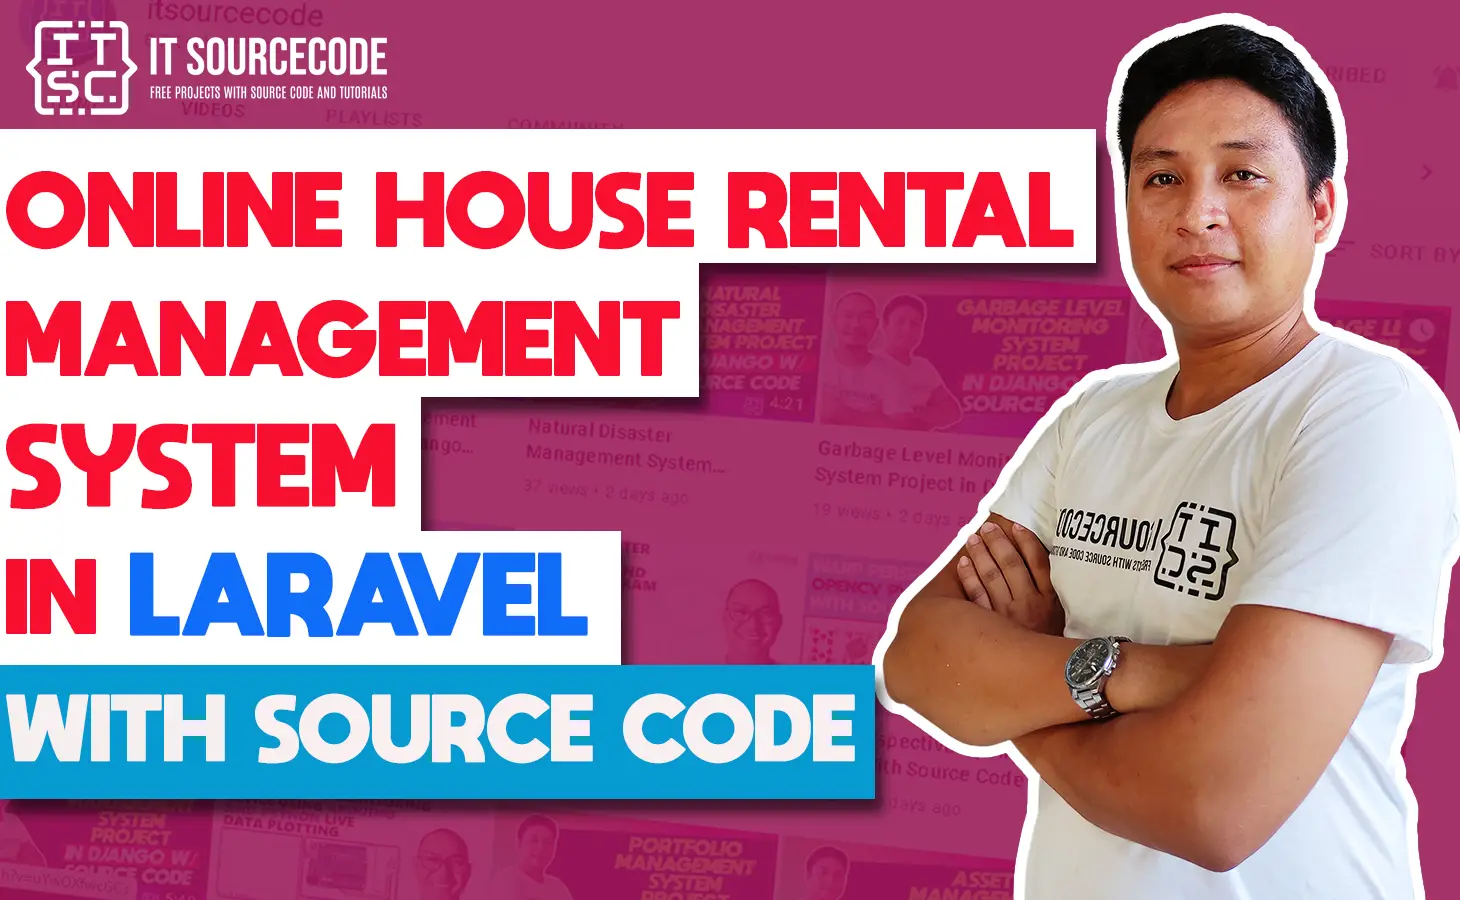 Online House Rental Management System in Laravel with Source Code